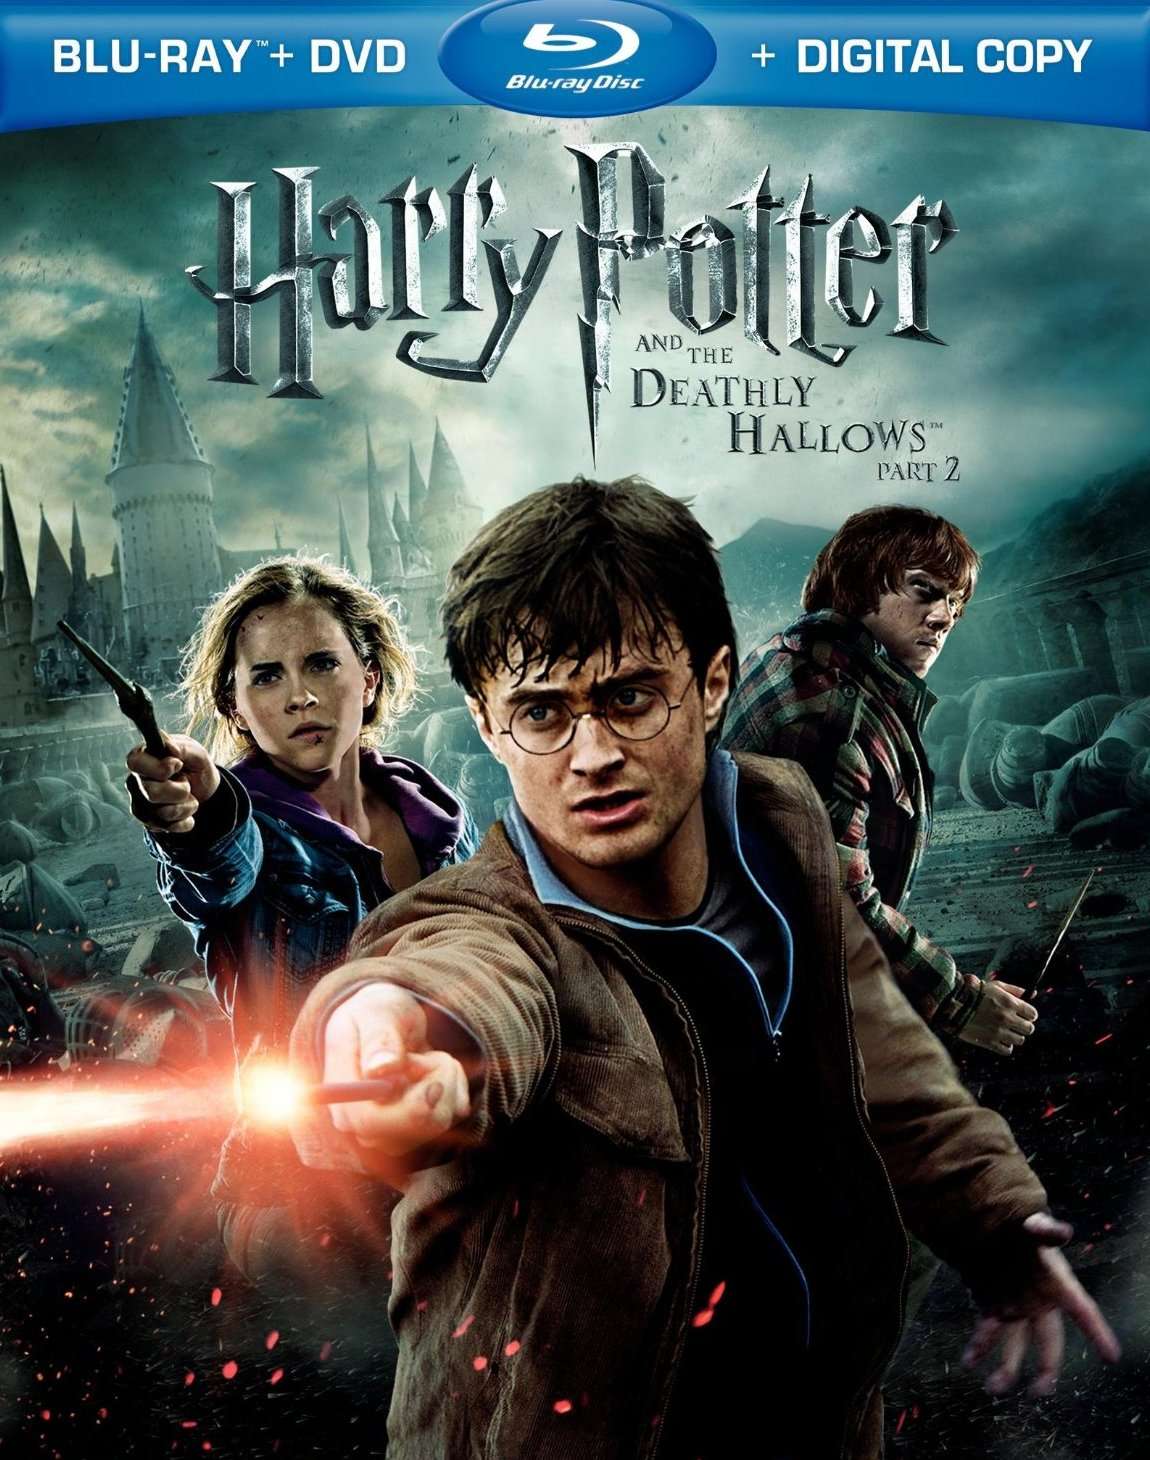 HARRY POTTER AND THE DEATHLY HALLOWS PART 2